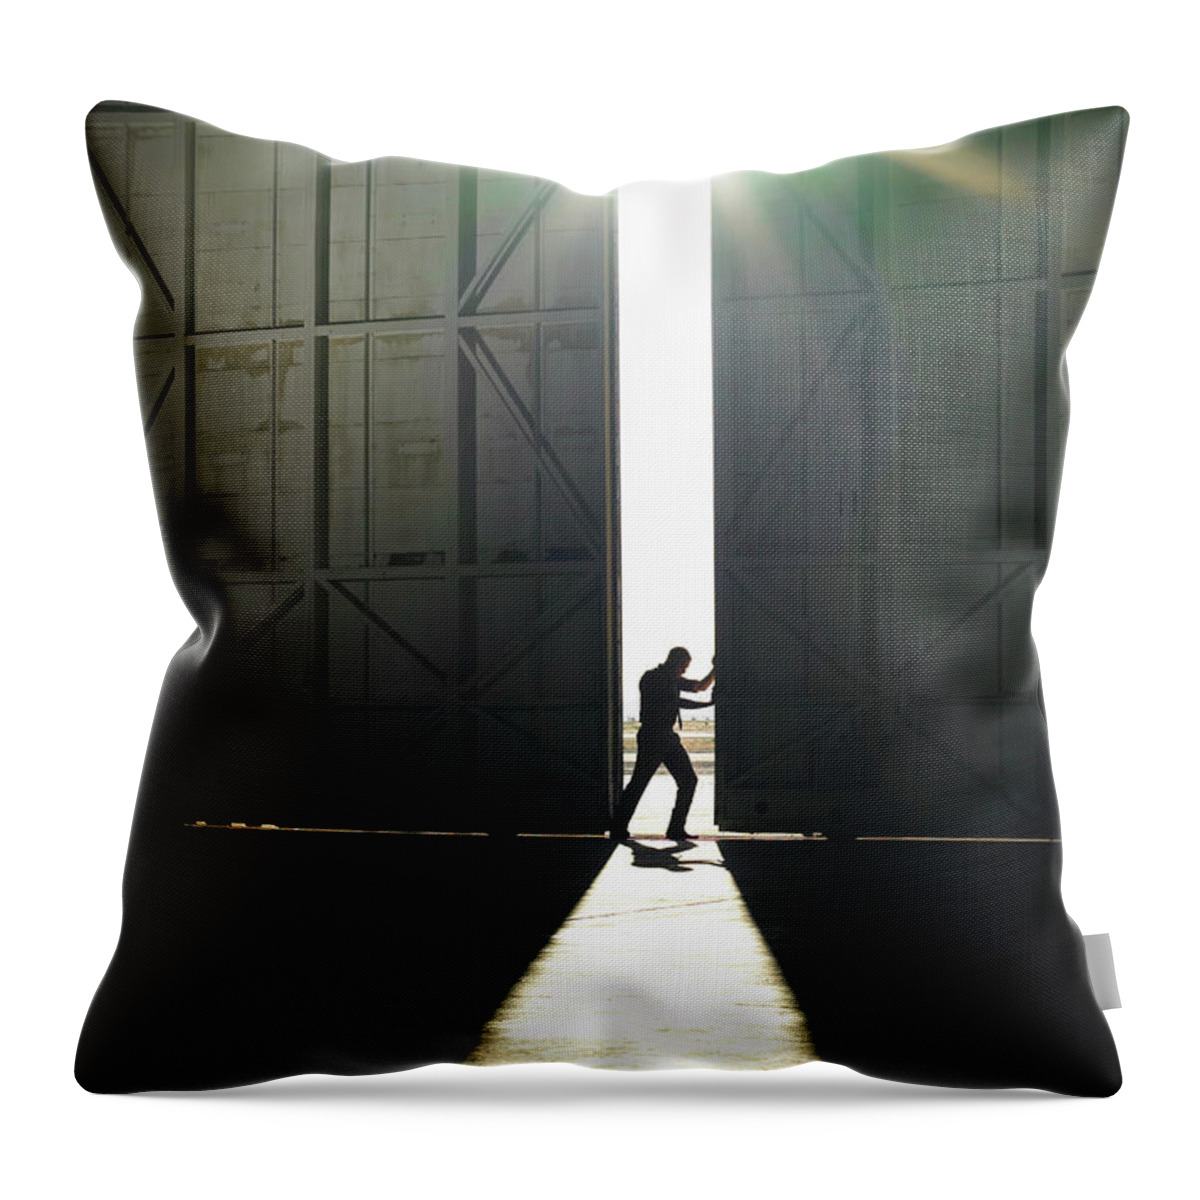 People Throw Pillow featuring the photograph Man Pushing Door Open by Ryan Mcvay